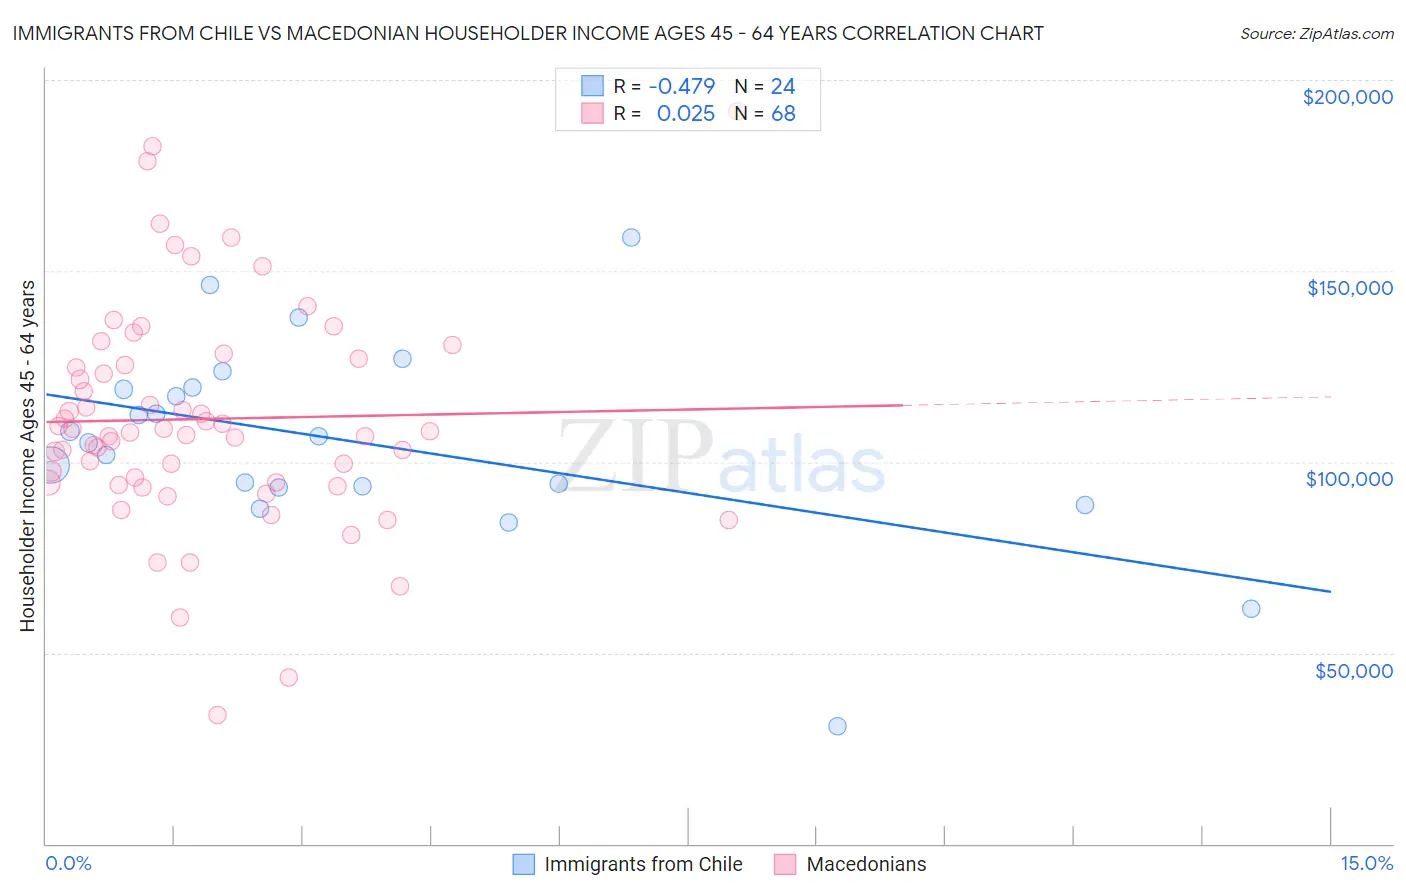 Immigrants from Chile vs Macedonian Householder Income Ages 45 - 64 years